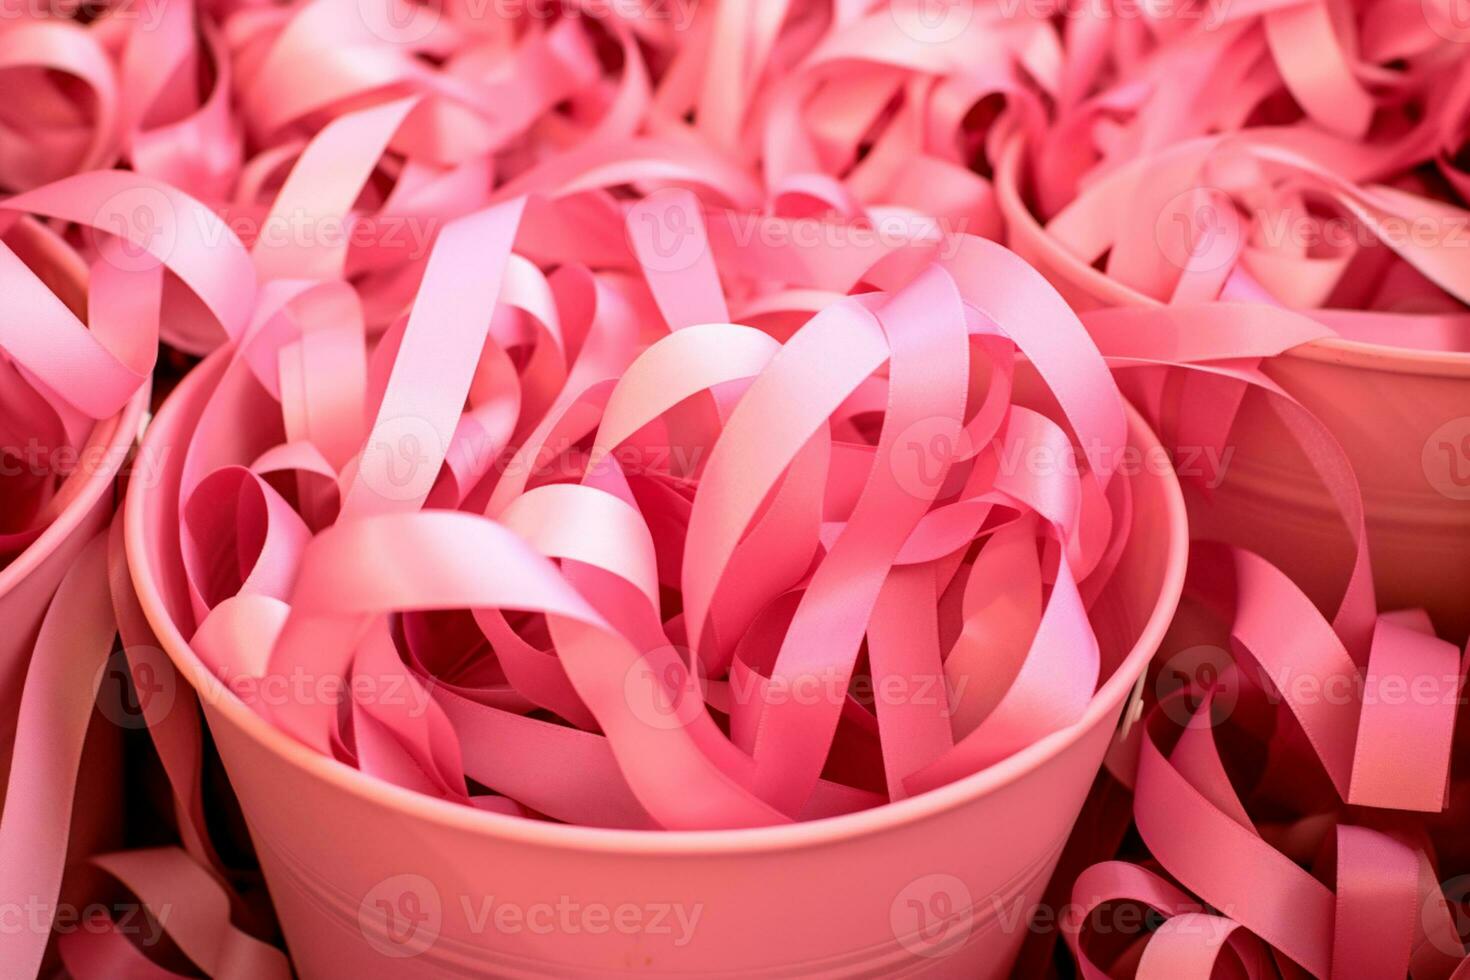 Pink October The pink bow or pink ribbon reminds us of the importance of taking care of our breast health. Early detection saves lives. Join the cause. AI Generative photo